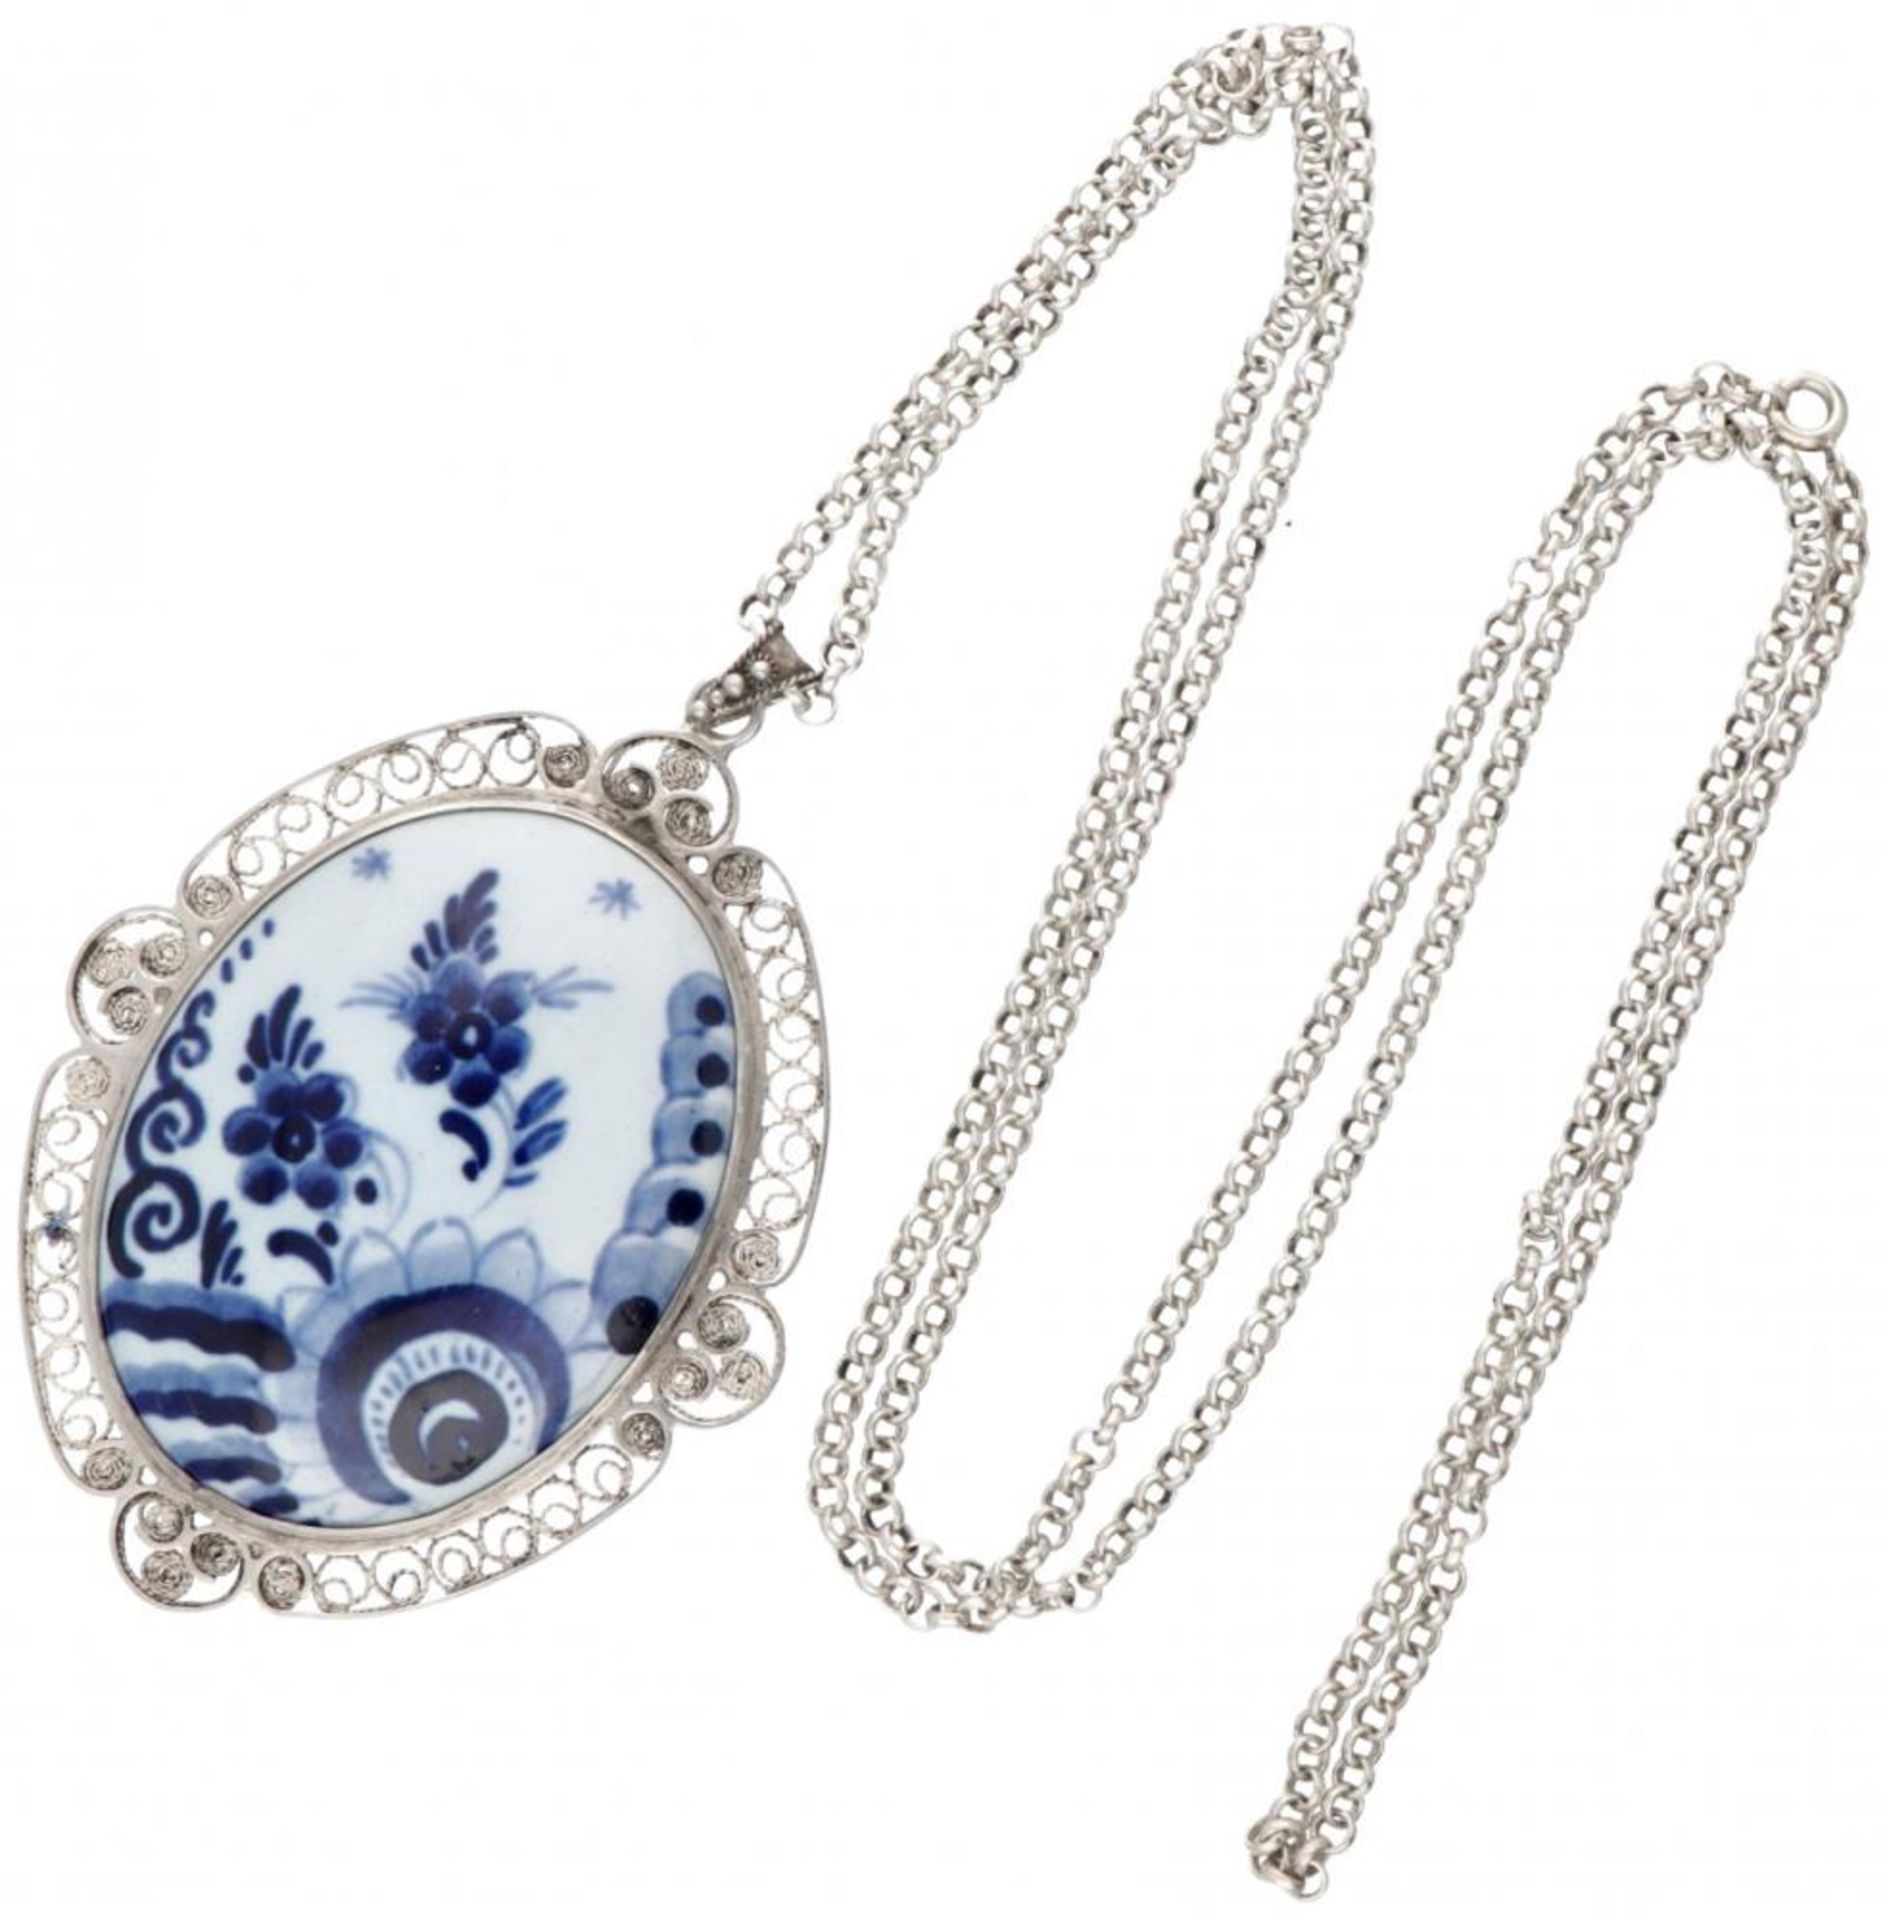 Sterling silver necklace and vintage filigree pendant with Delft blue ceramic. - Image 2 of 3